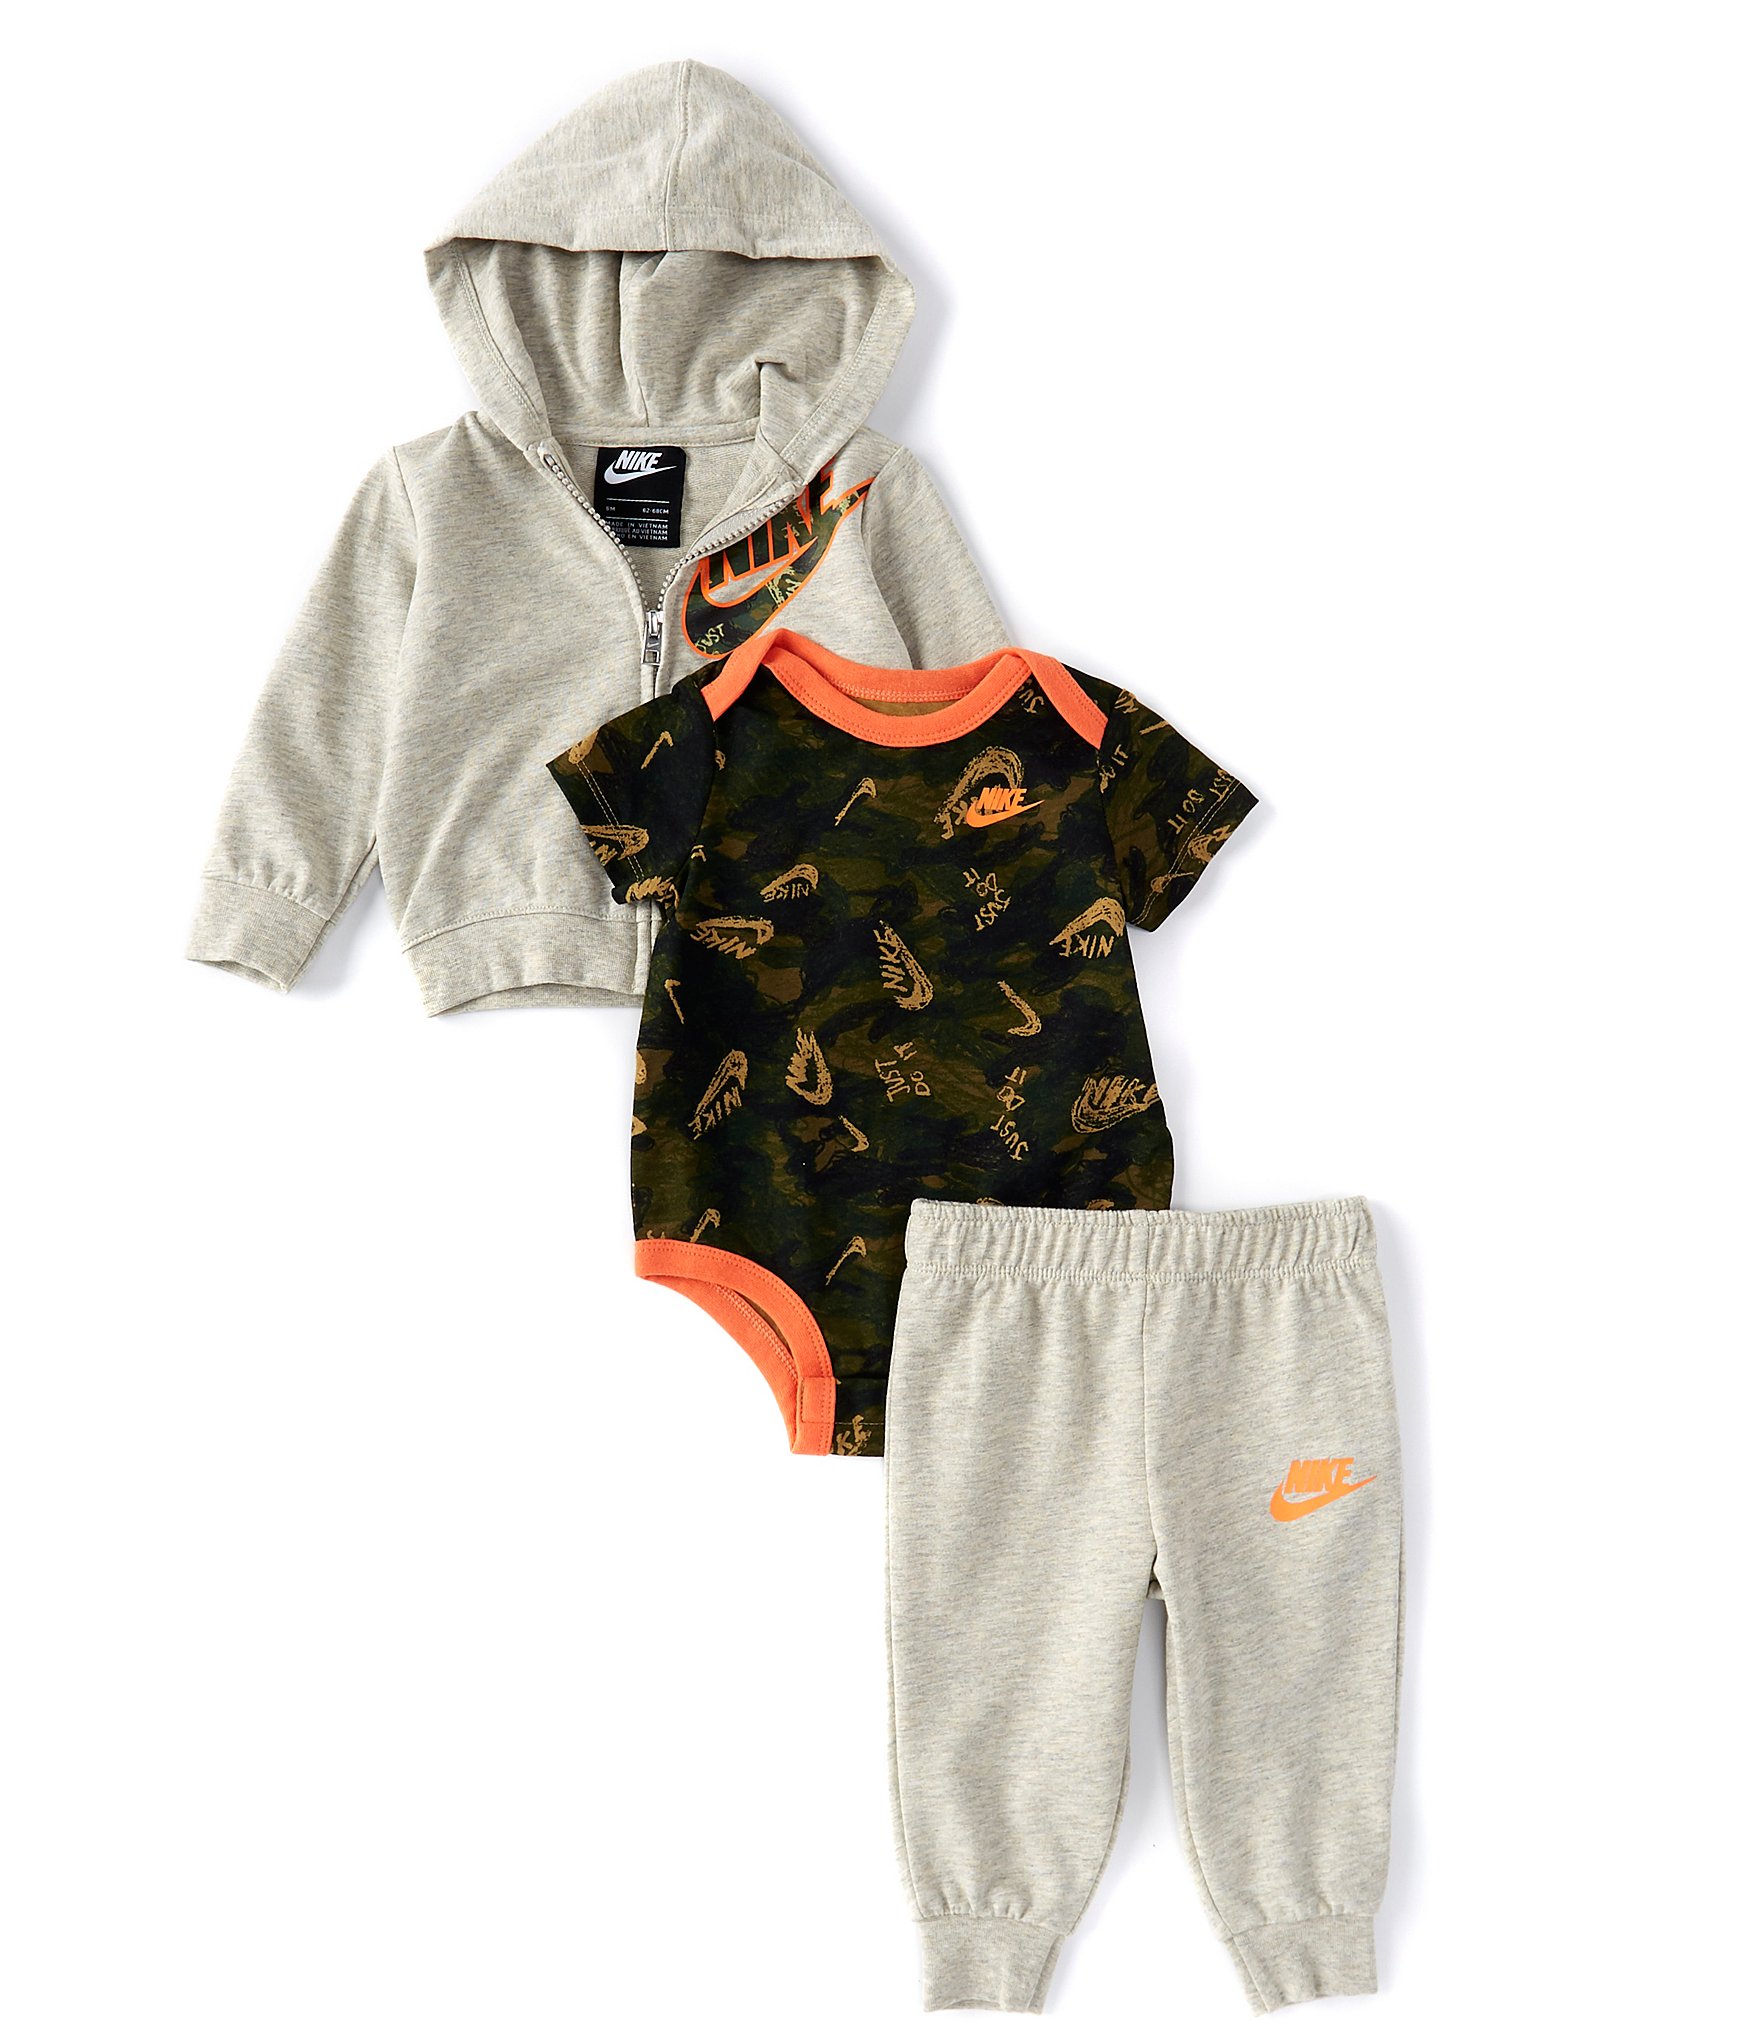 12 month nike outfit